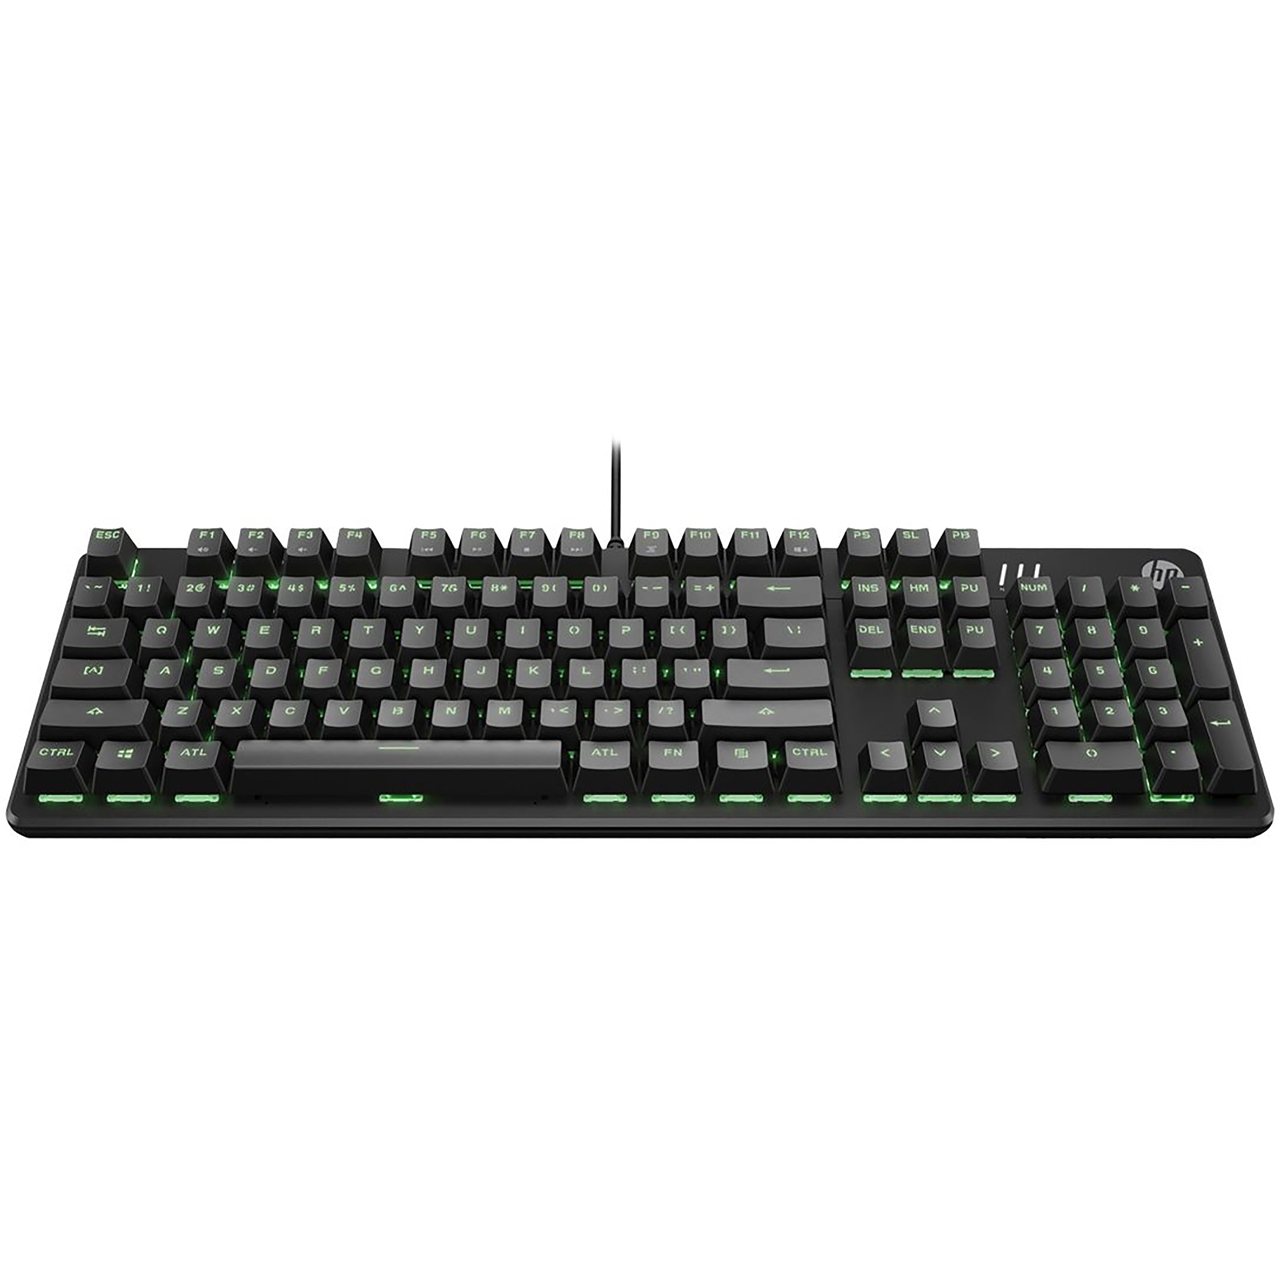 HP 500 Wired USB Gaming Keyboard Review